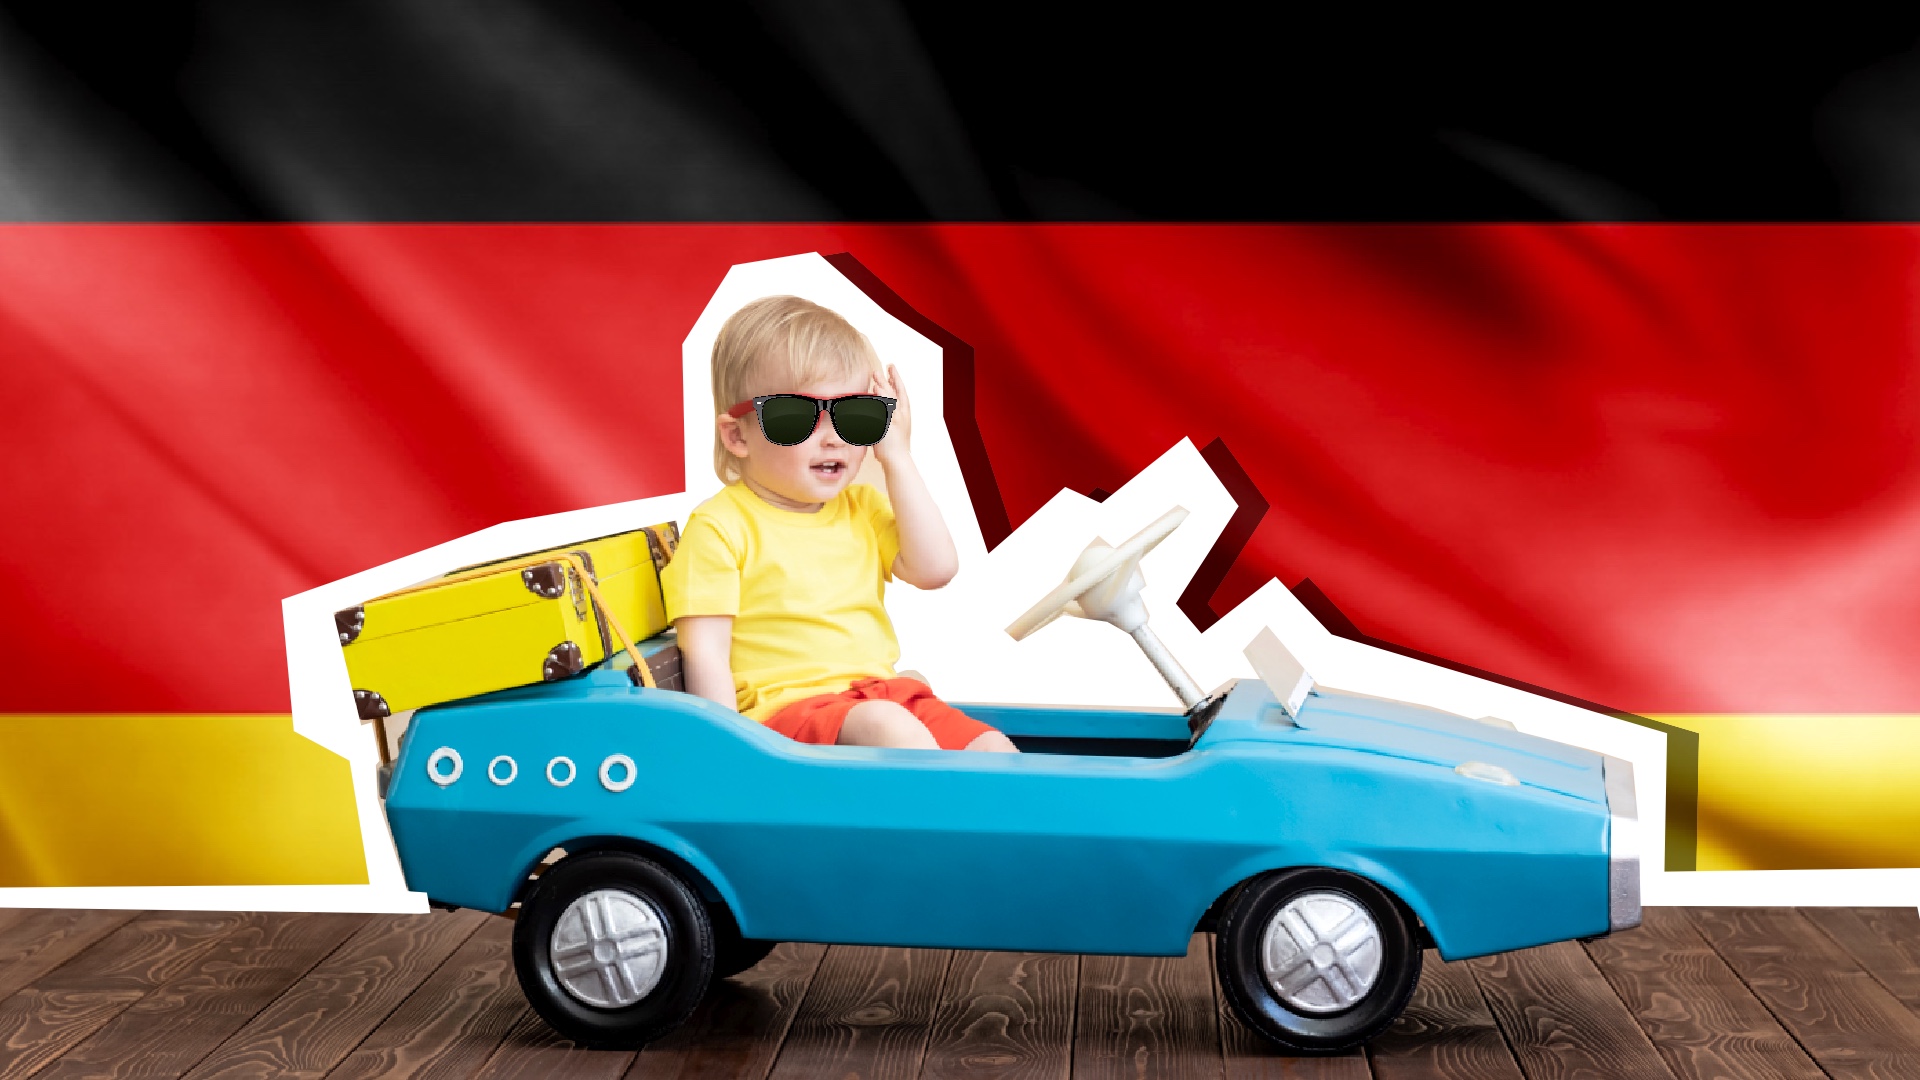 A child sits in front of a car, with a German flag is displayed in the background